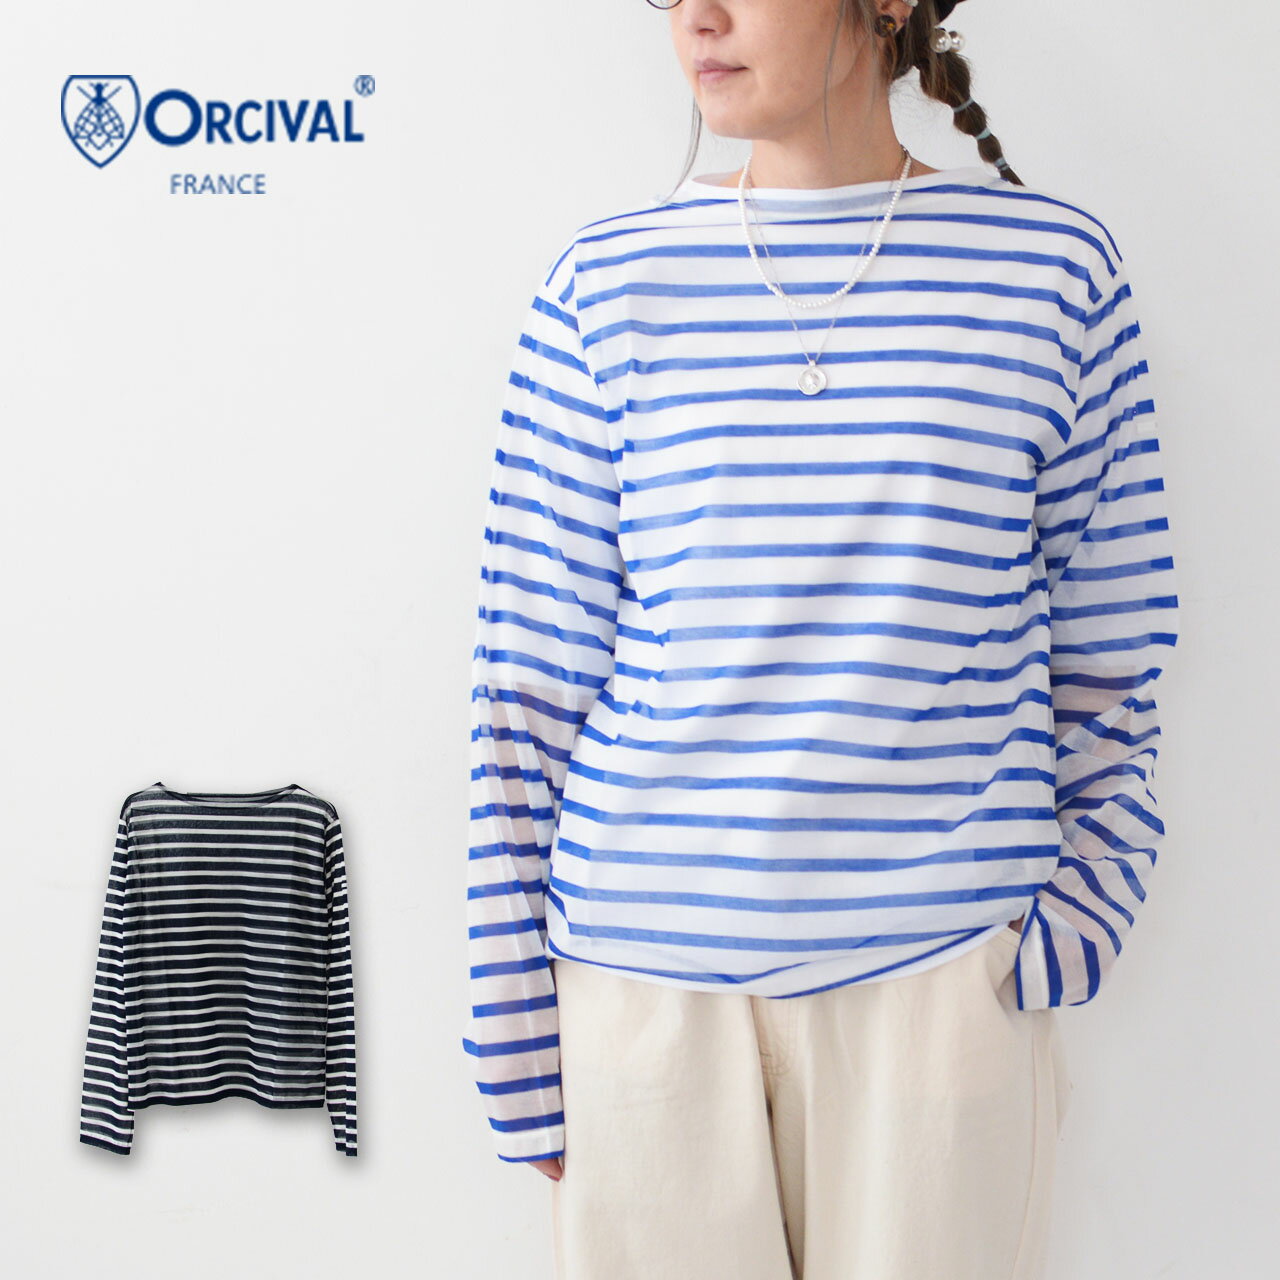 ORCIVAL オーチバル オーシバル W SEE THROUGH BOAT NECK L/S CUT AND SEWN-BORDER- OR-C0350STJ-B シースルー ボートネック長袖カットソー ボーダー シアー素材 ボートネック LADY 039 S 2024SS